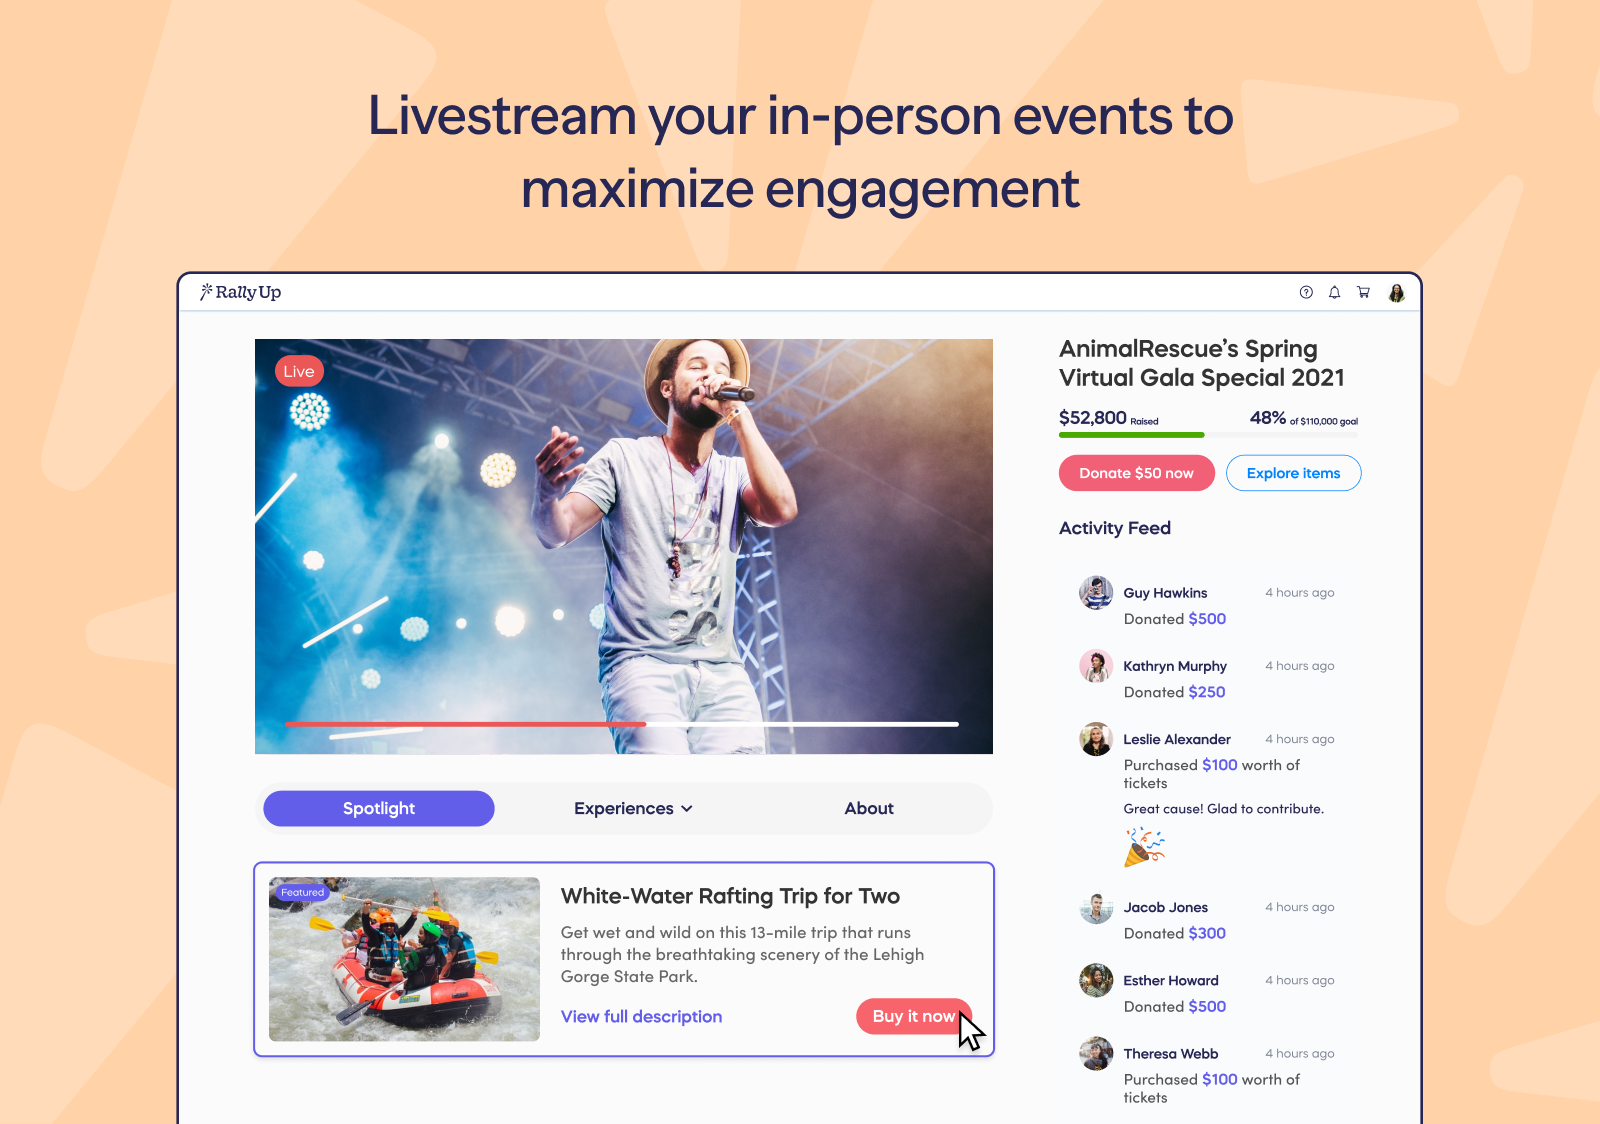 Livestream your in-person events to maximize engagement